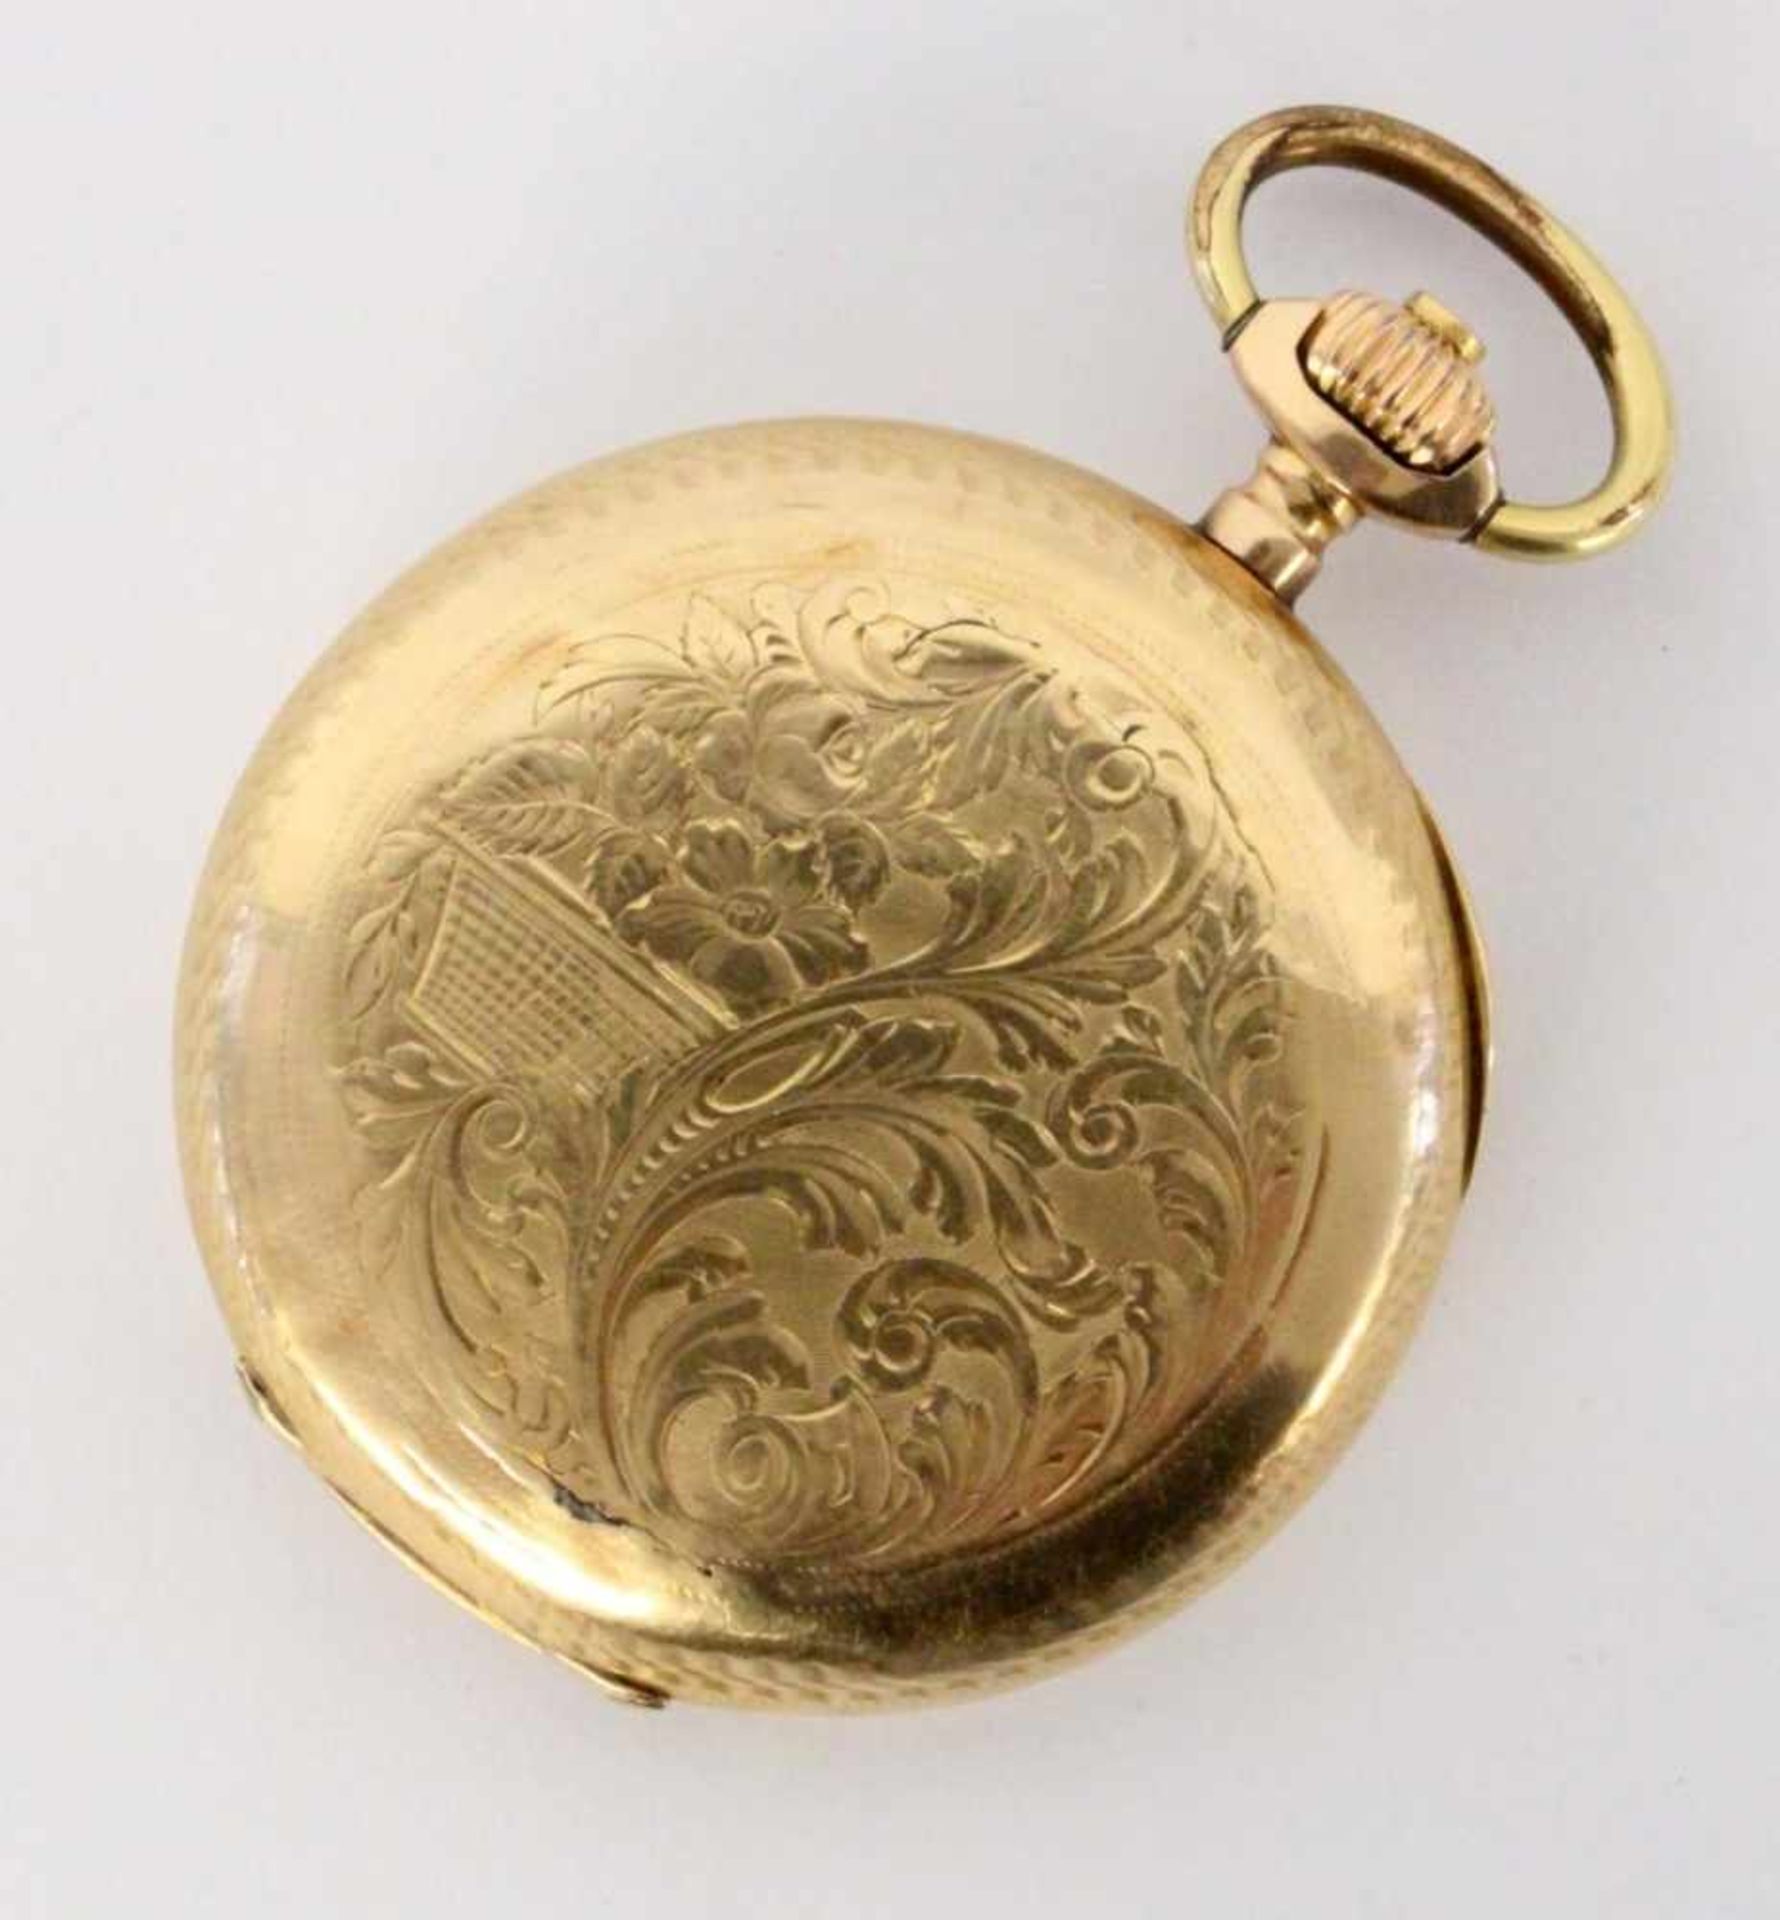 ''A HUNTER CASED POCKET WATCH Pateck & Cie., Geneve circa 1910 585/000 yellow gold with